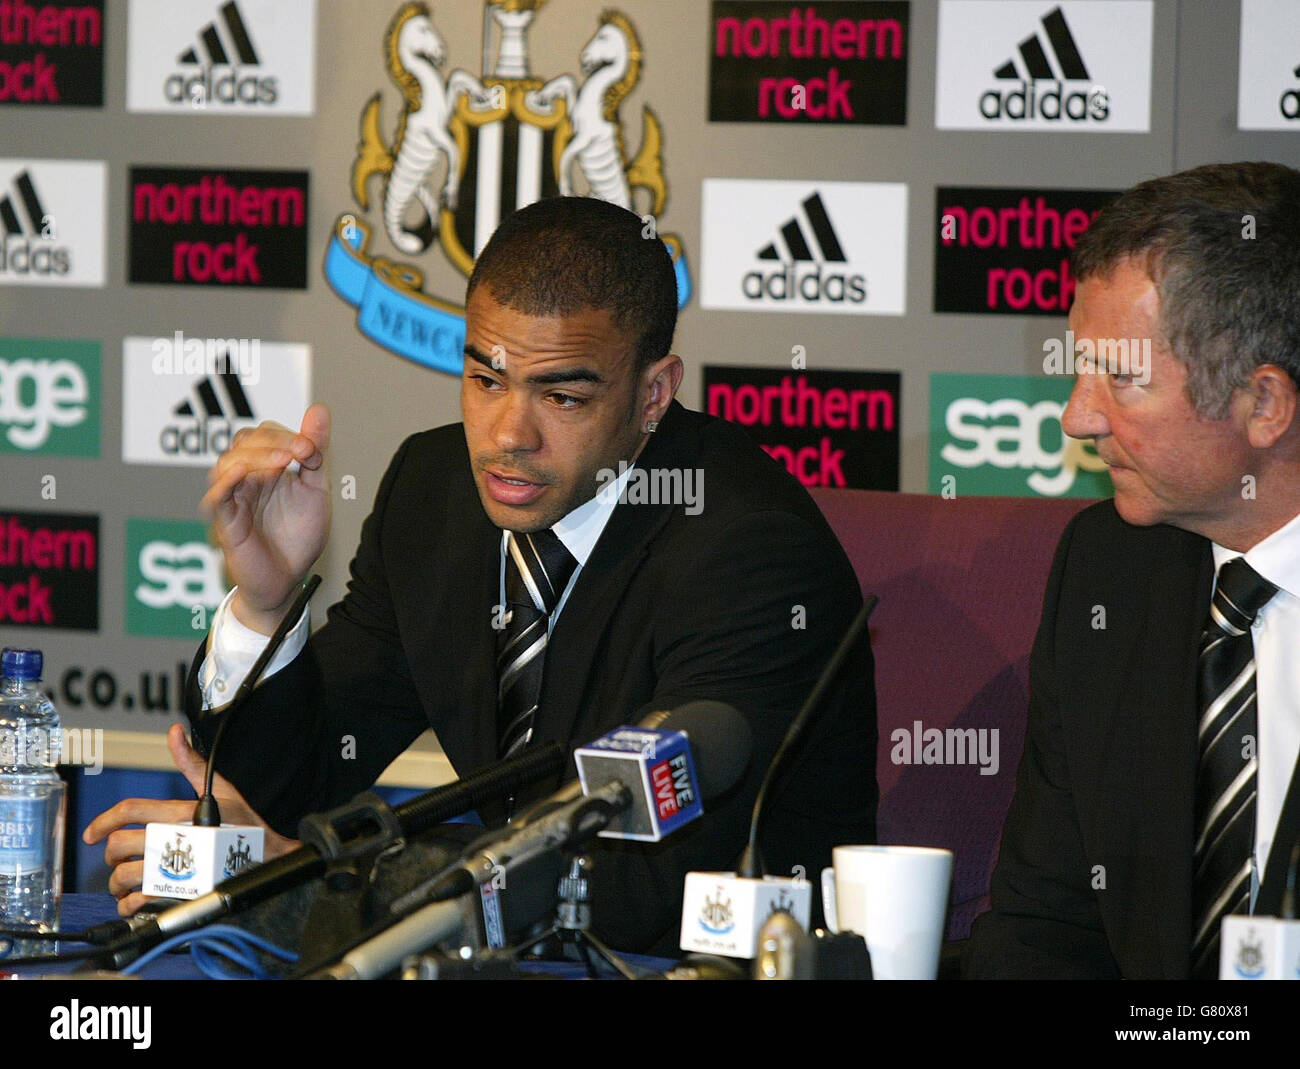 Newcastle United manager Graeme Souness (C) with players Kieron Dyer (L) and Lee Bowyer during a press conference following the Barclays Premiership match against Aston Villa at St James' Park. Bowyer and Dyer were both sent off for fighting each other in brawl during the match. Stock Photo